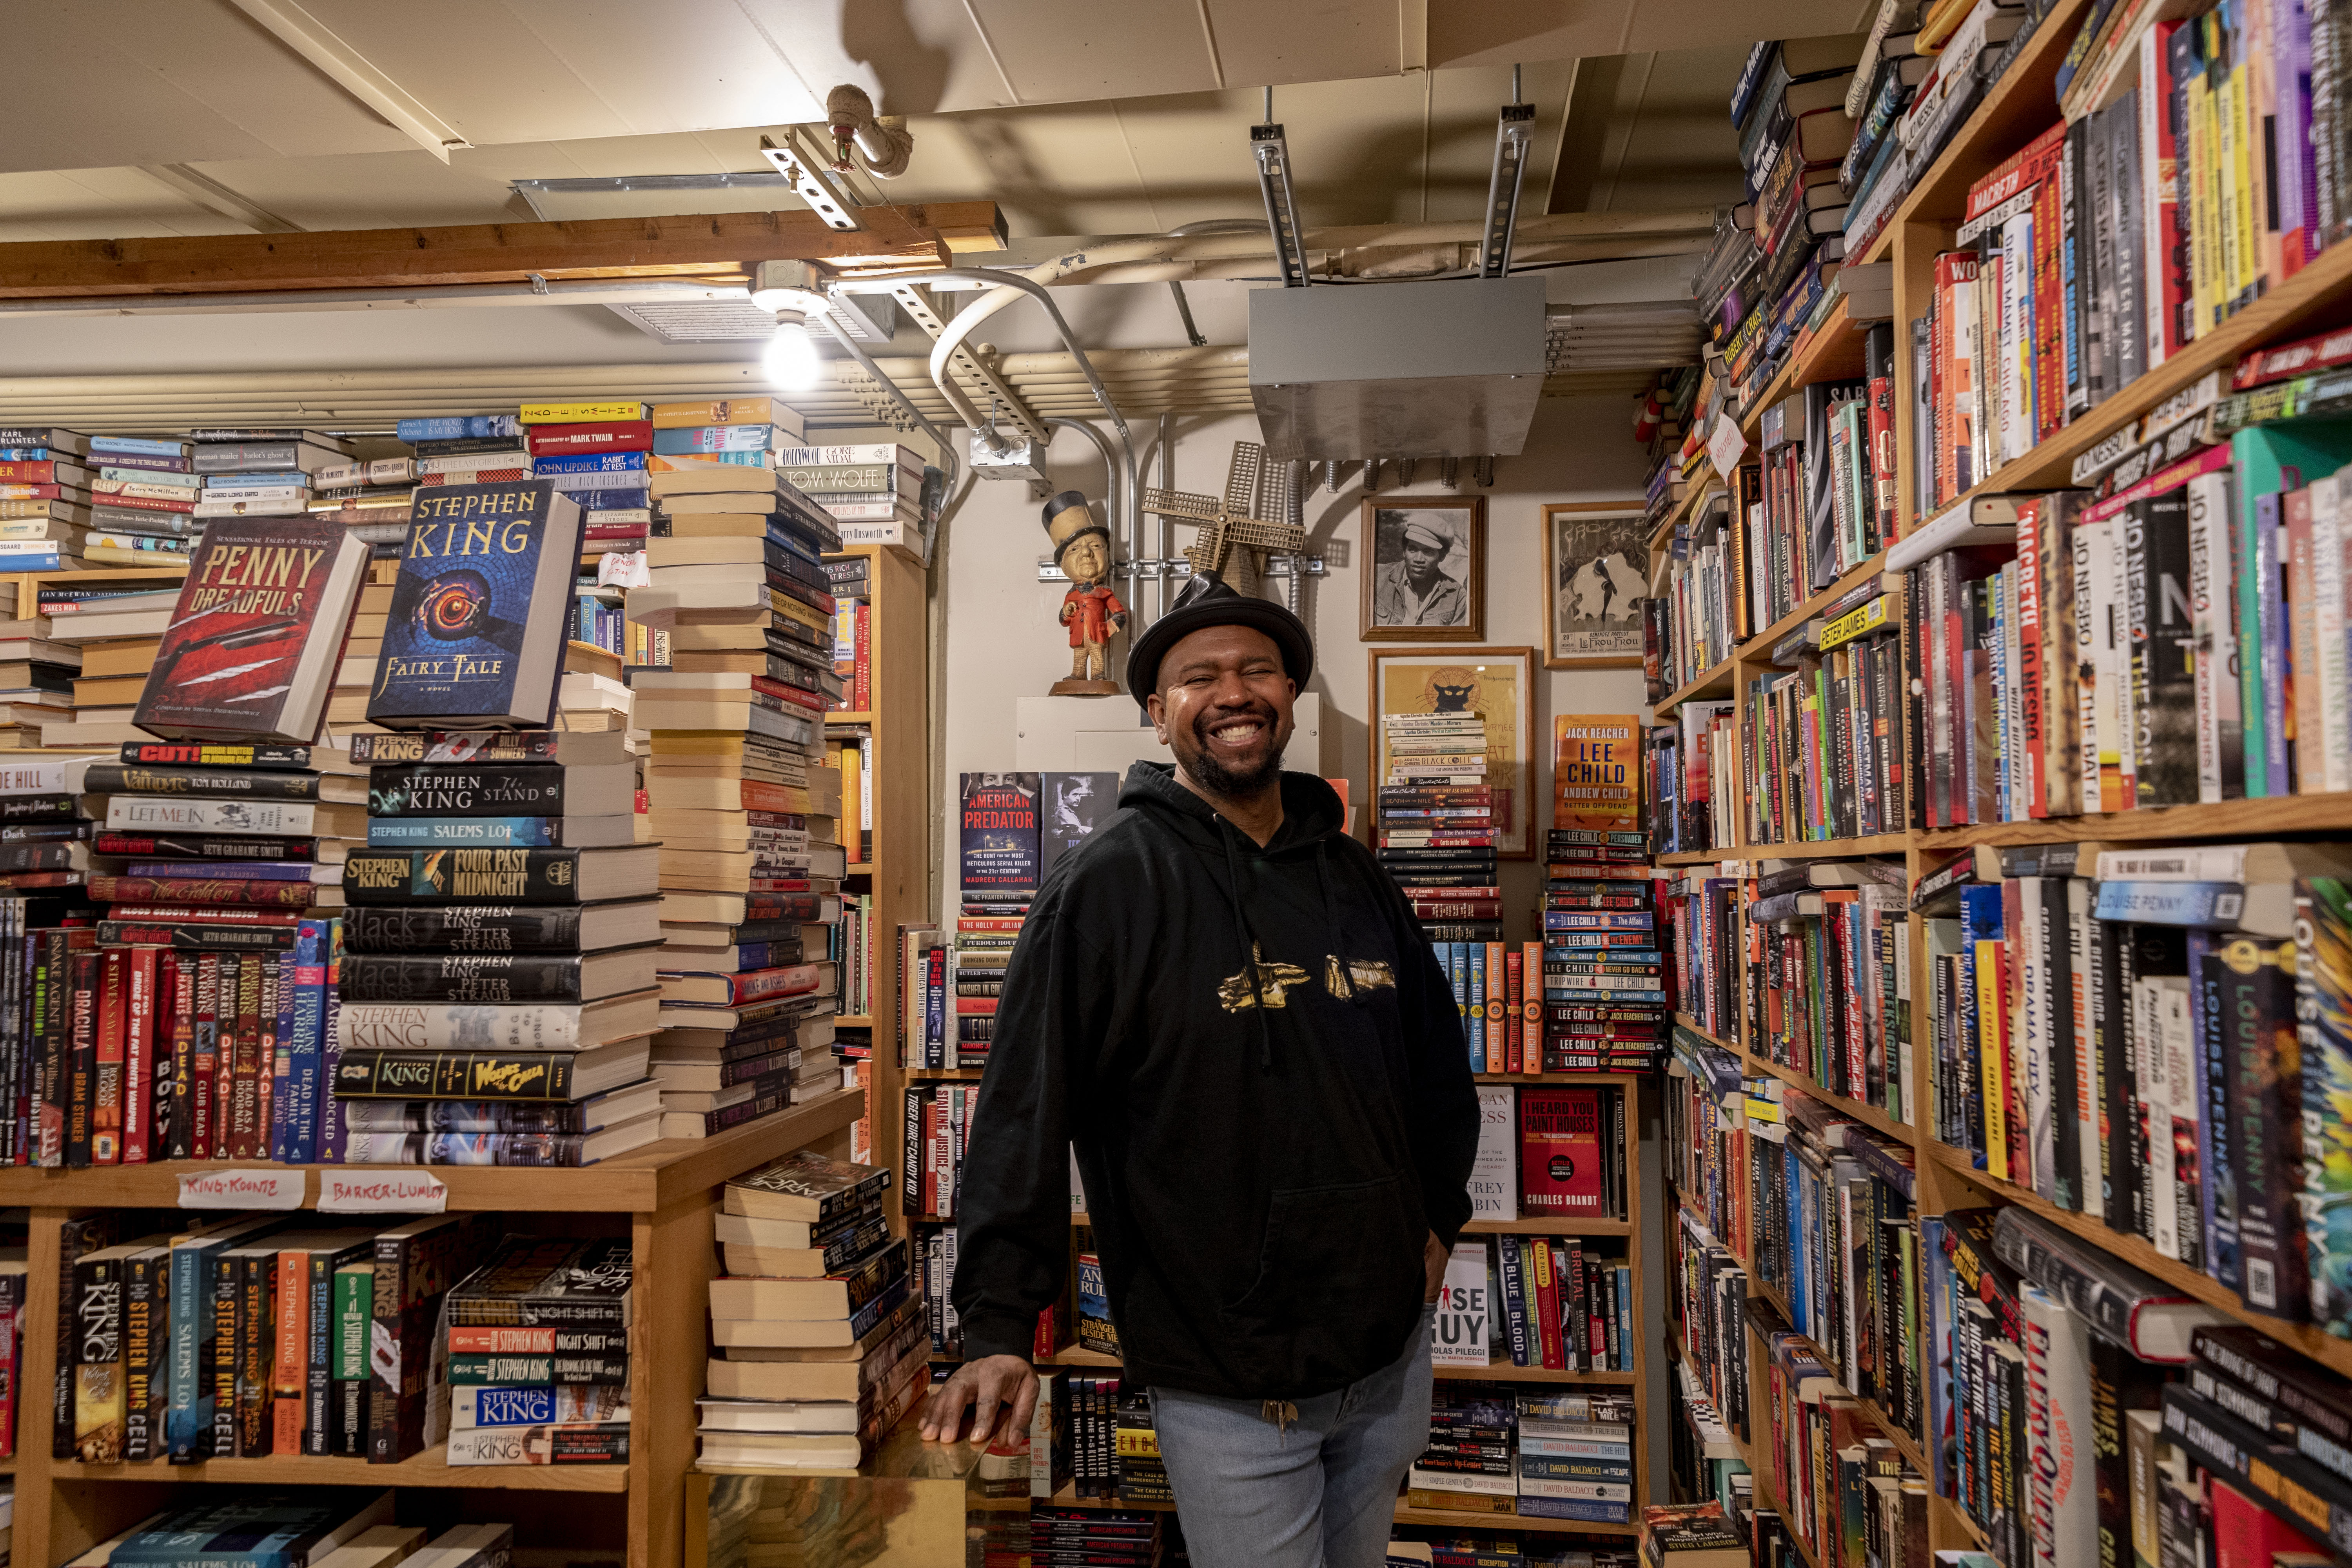 J.B. Johnson smiling inside his book store BLMF Literary Saloon in Pike Place Market.